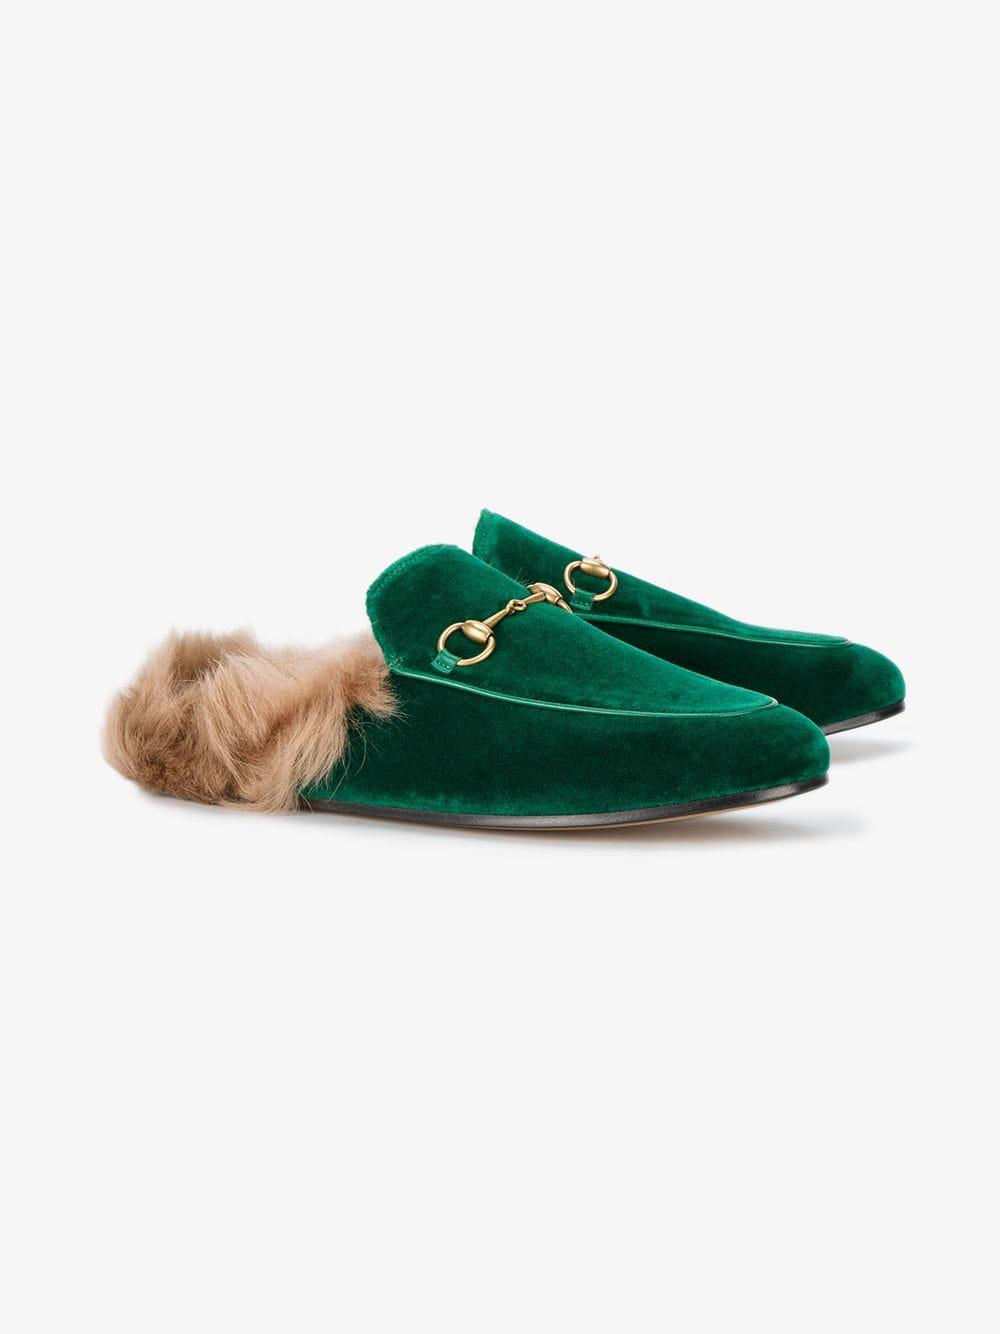 gucci slippers green